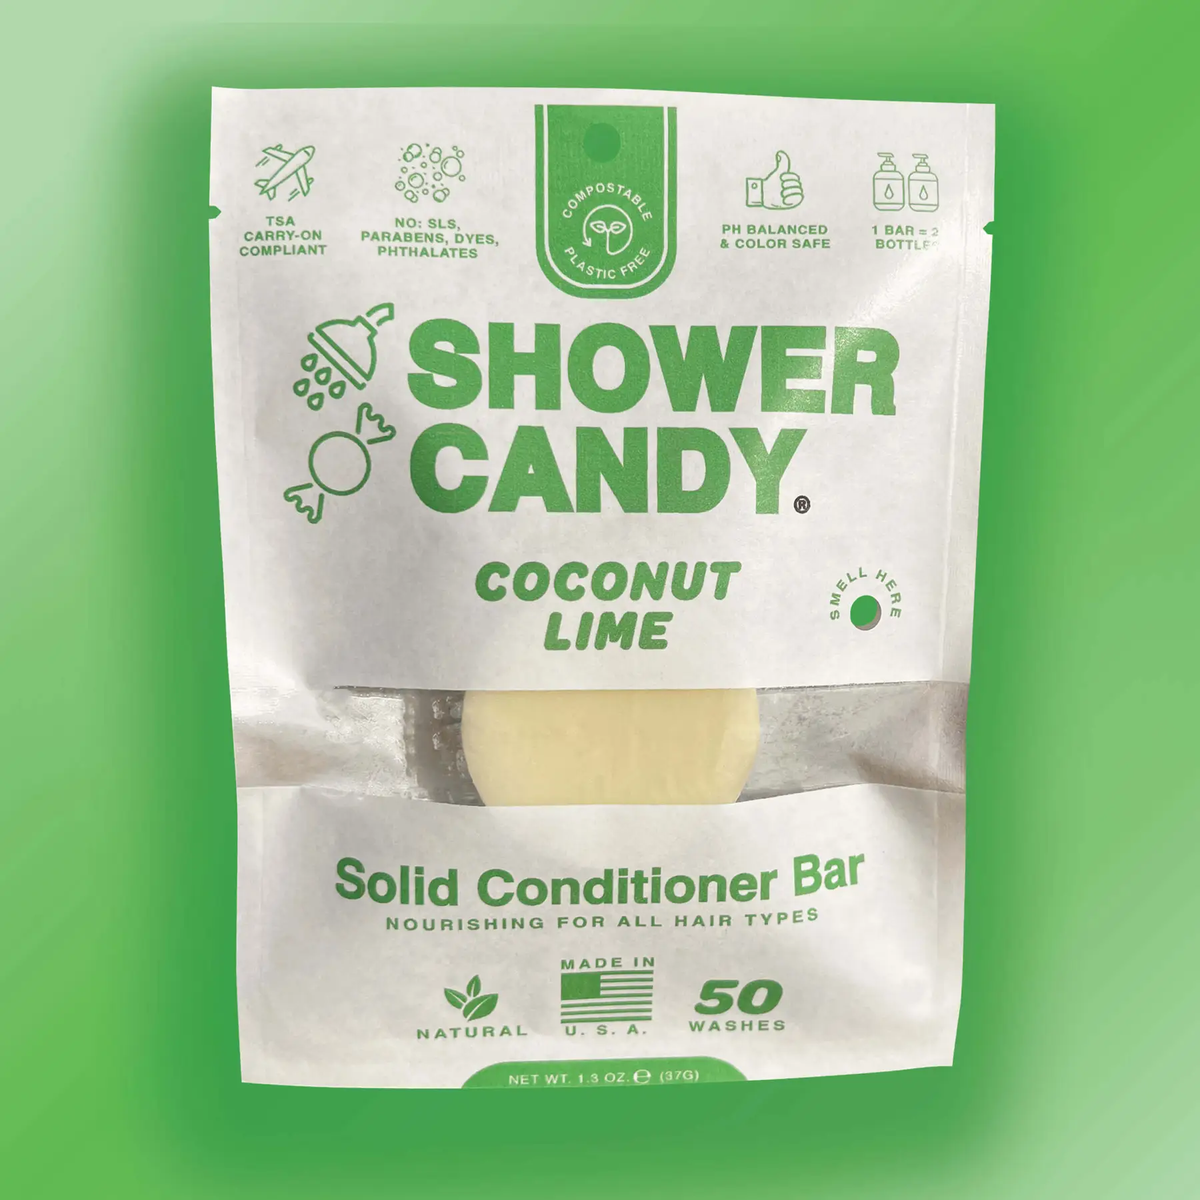 Shower Candy - Coconut Lime Conditioner Bar